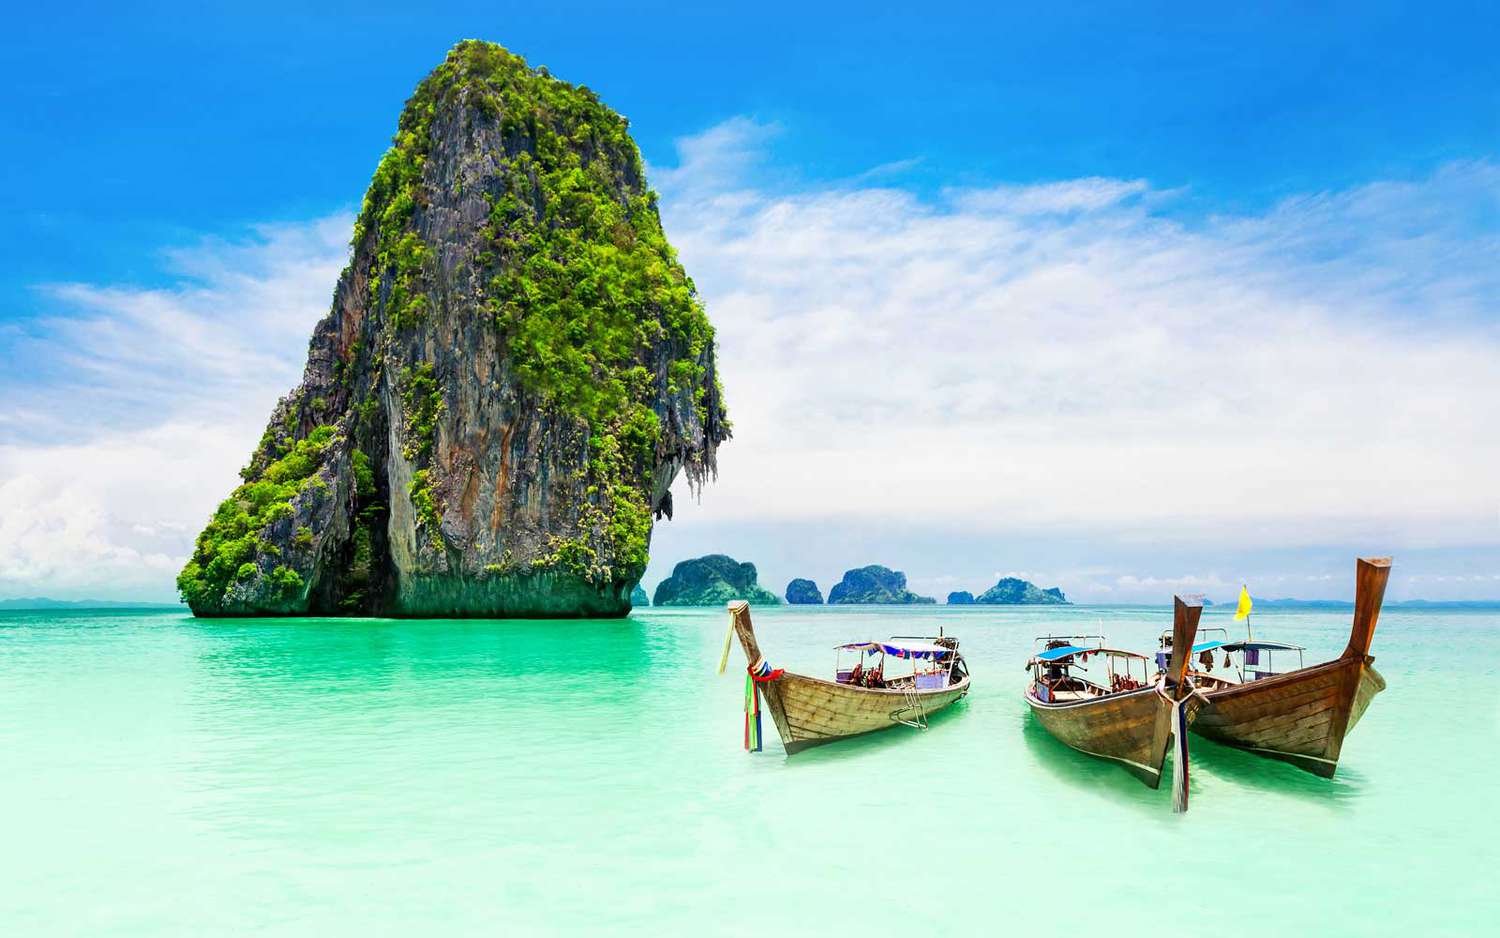 Thailand is one of the most visited beach destinations in the world